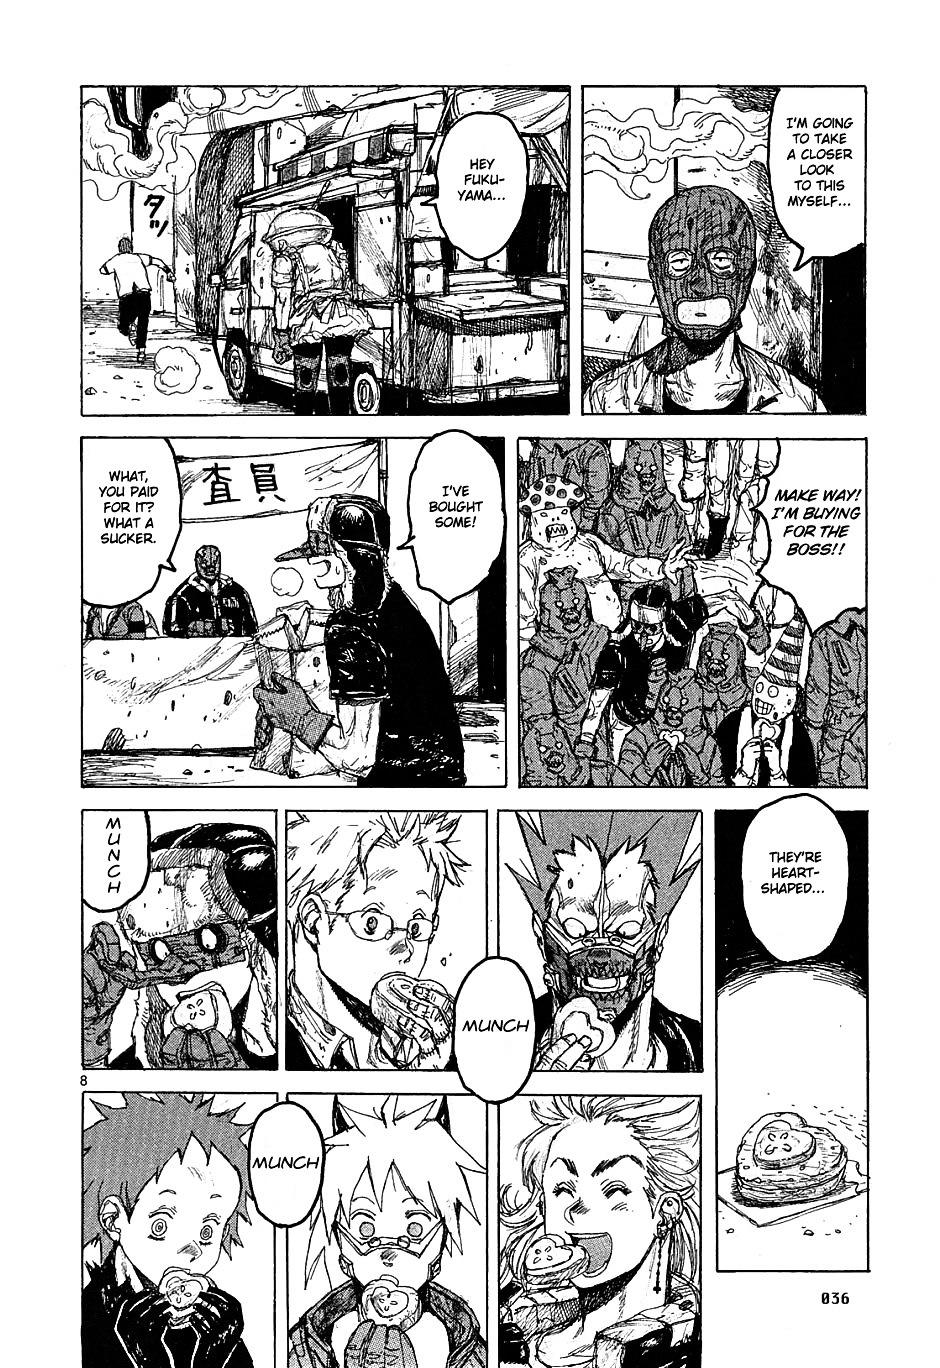 Dorohedoro Chapter 38 : Meatbags Free For All page 8 - Mangakakalot